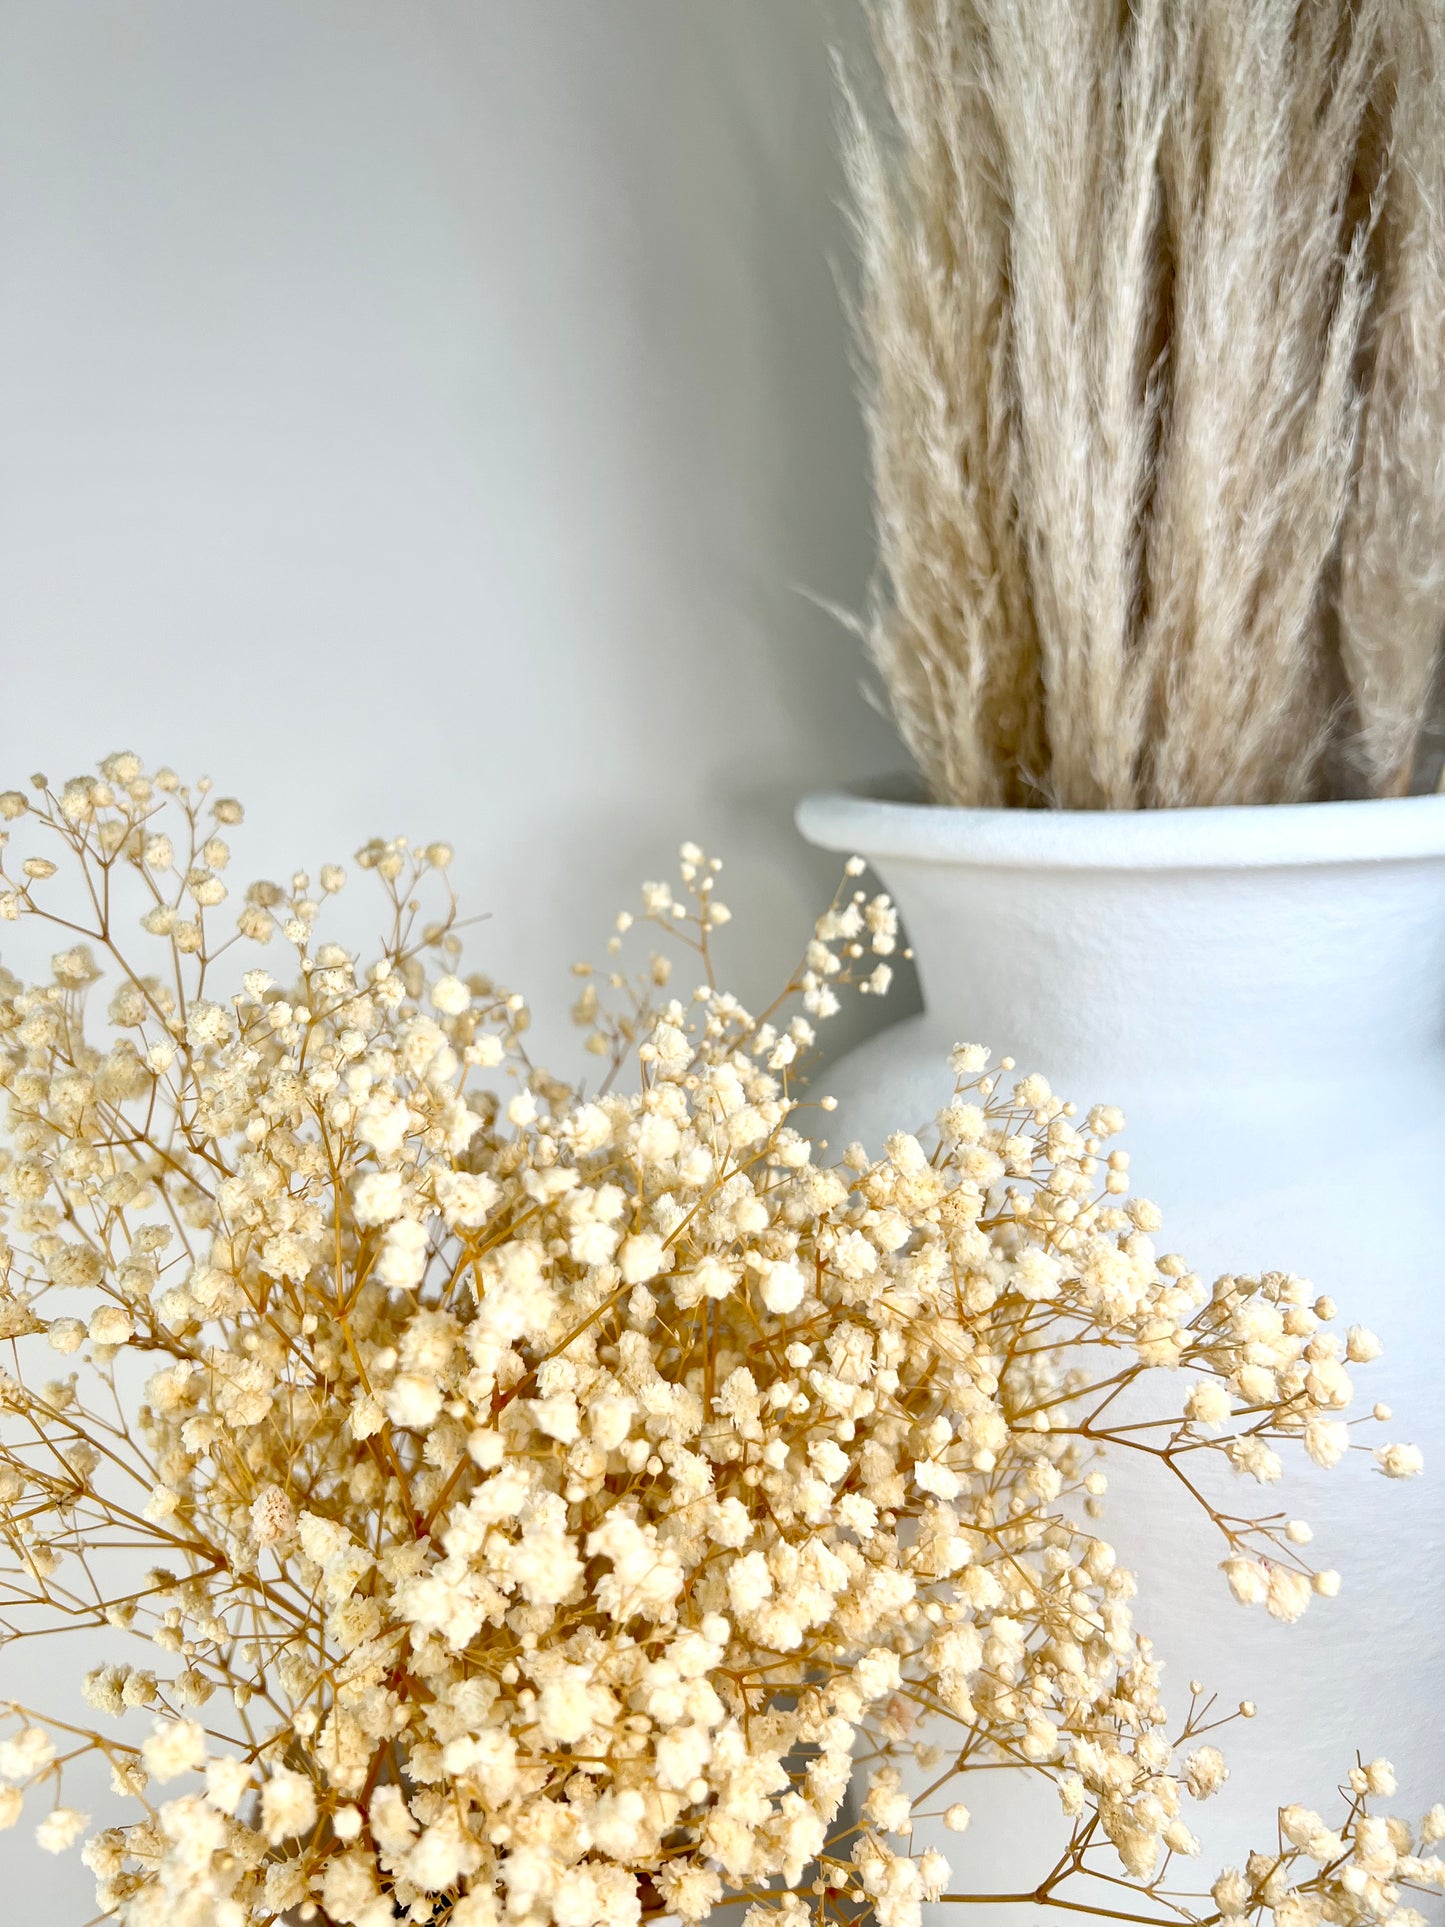 Dried Baby's Breath